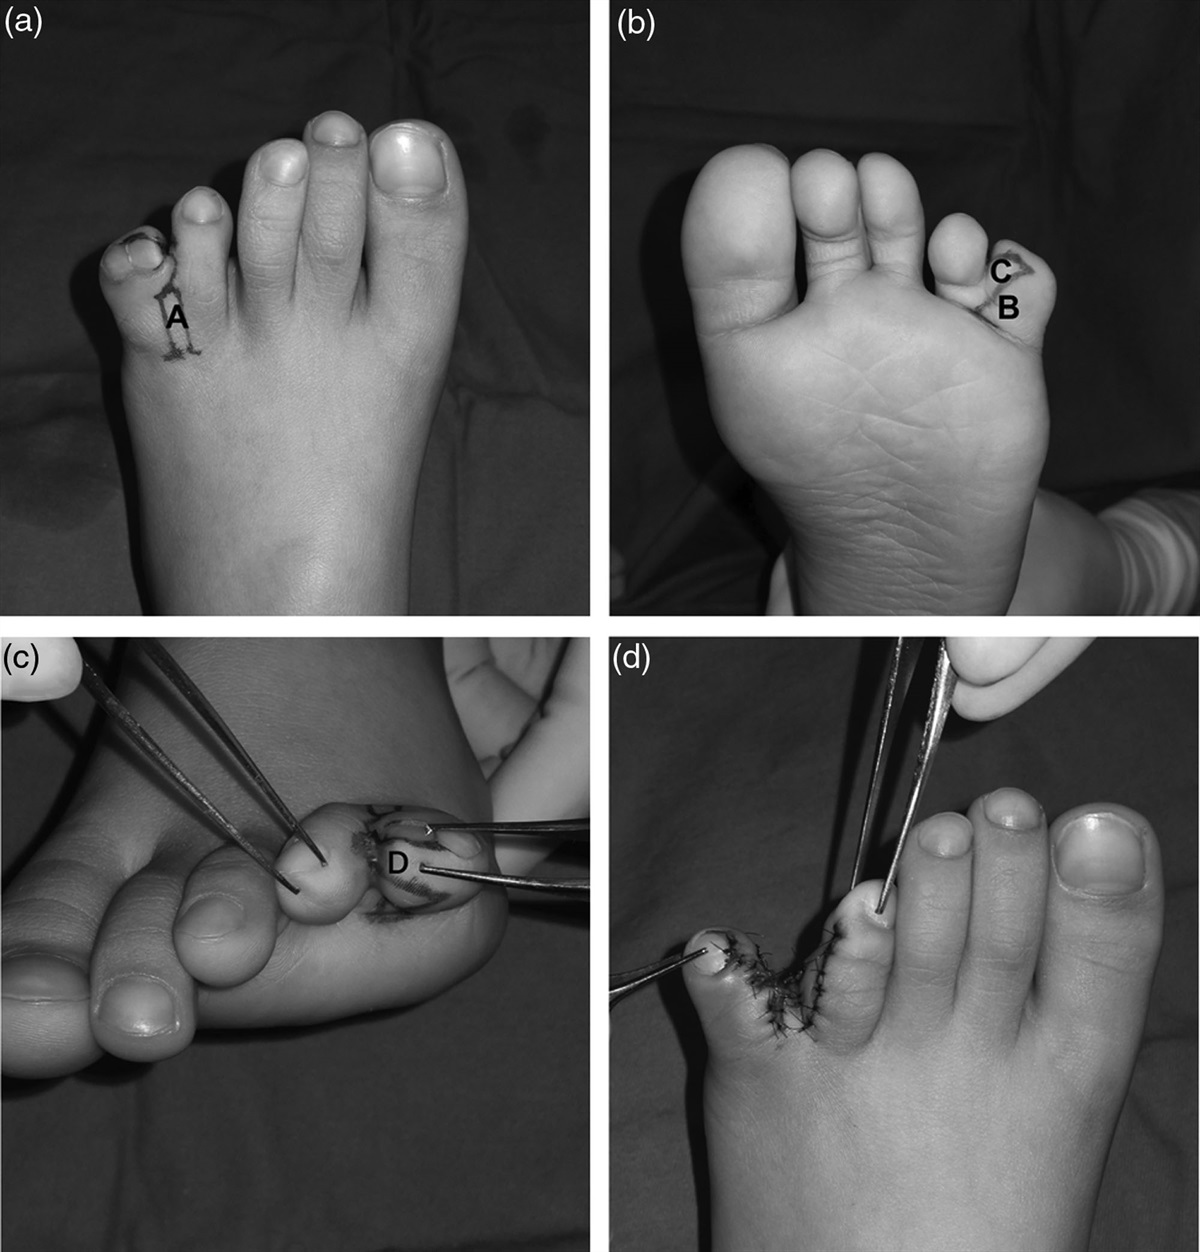 Reconstruction of polysyndactyly of the fused fifth toe with the fourth toe